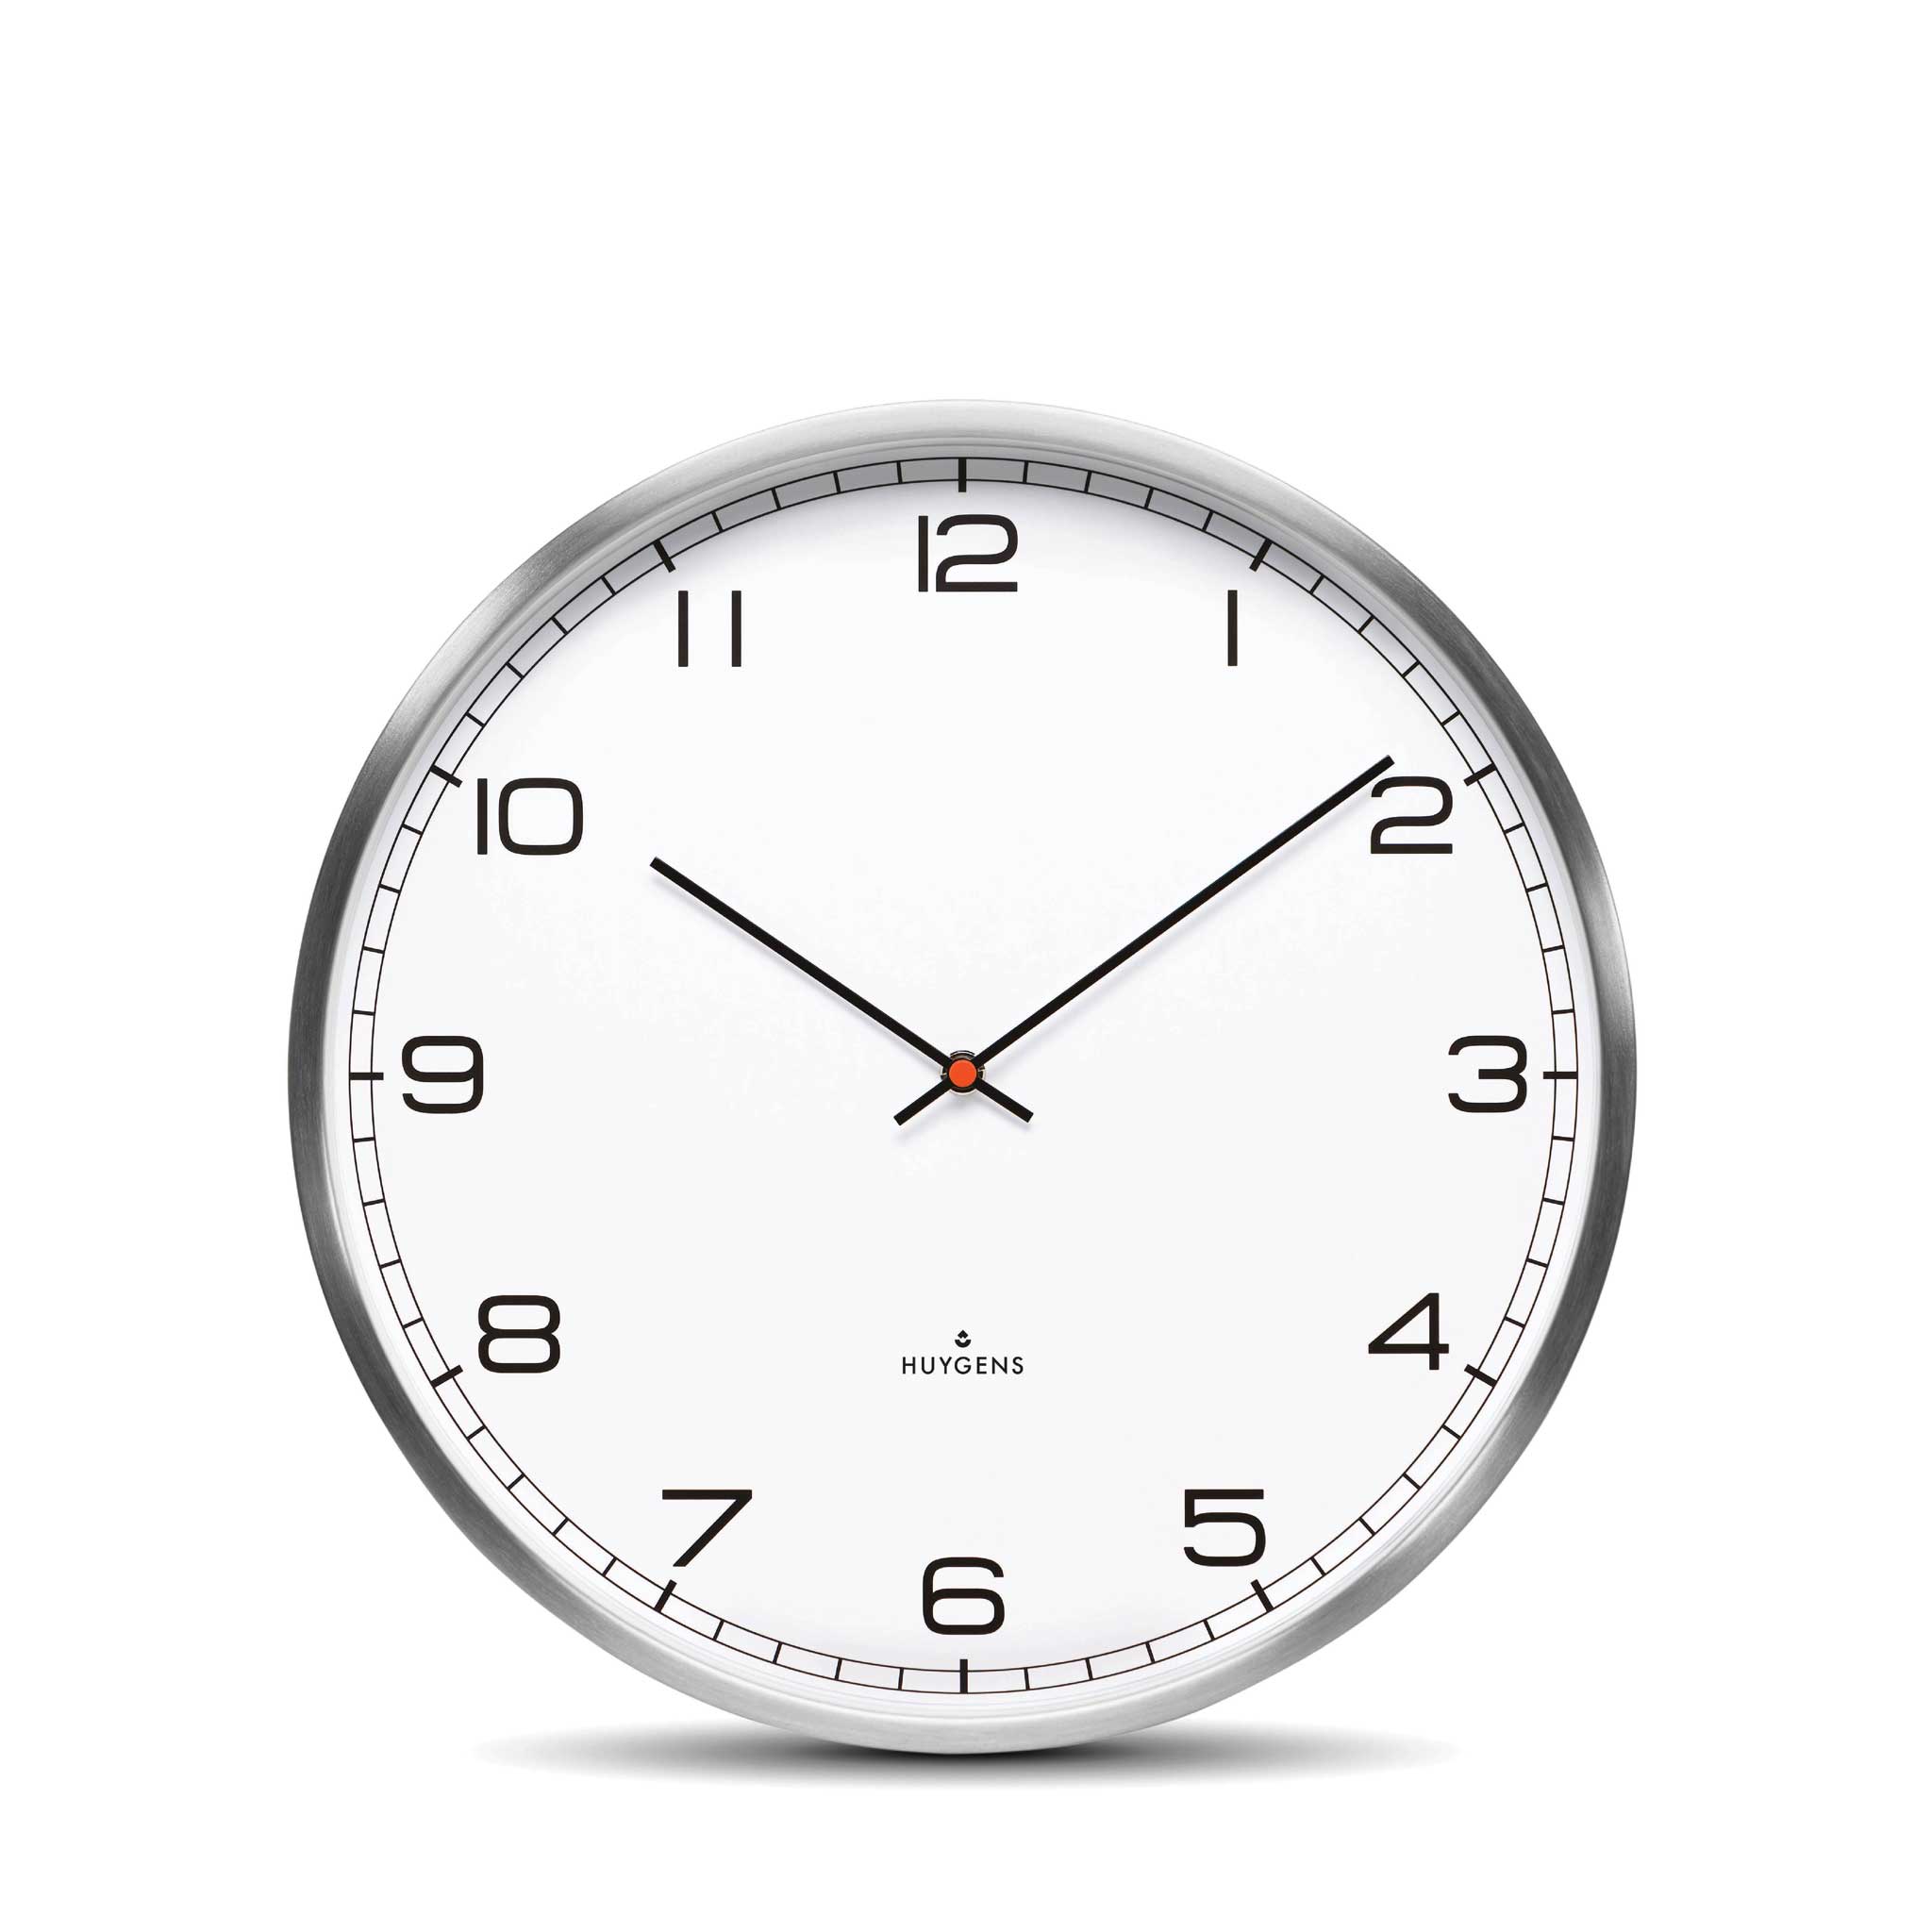 ONE ARABIC | Silent WALL CLOCK | stainless steel with white dial & Arabic digits | Huygens